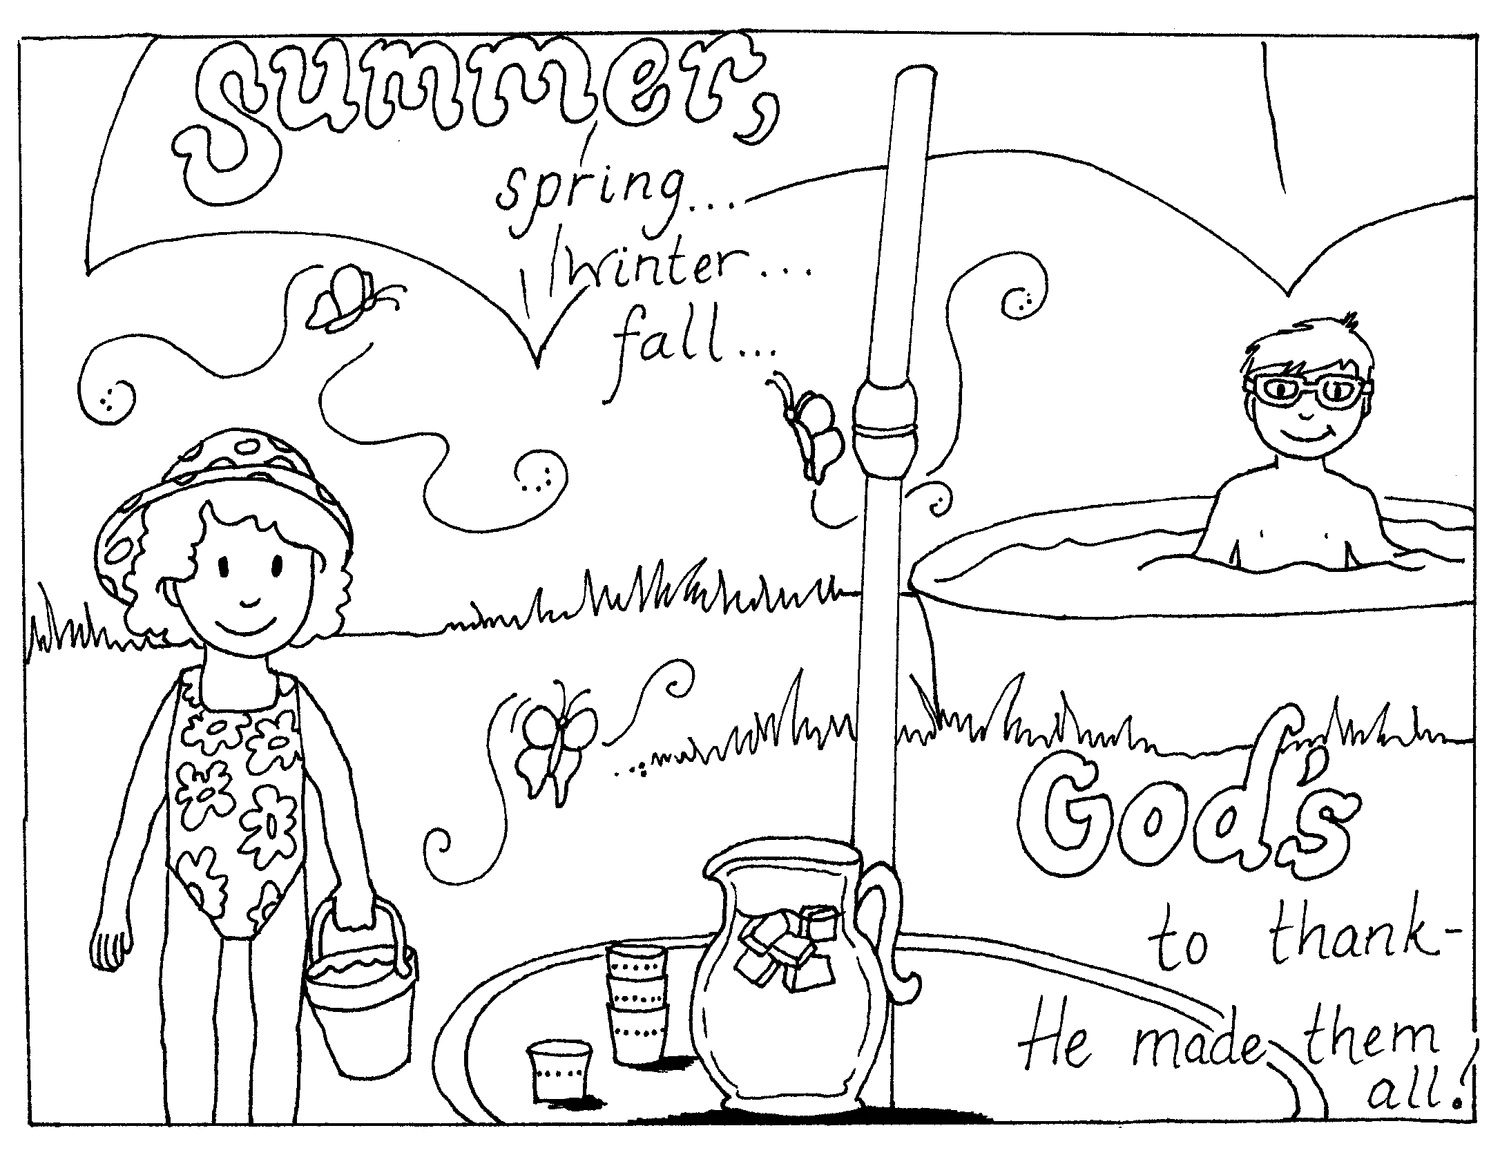 spring-and-winter-coloring-pages